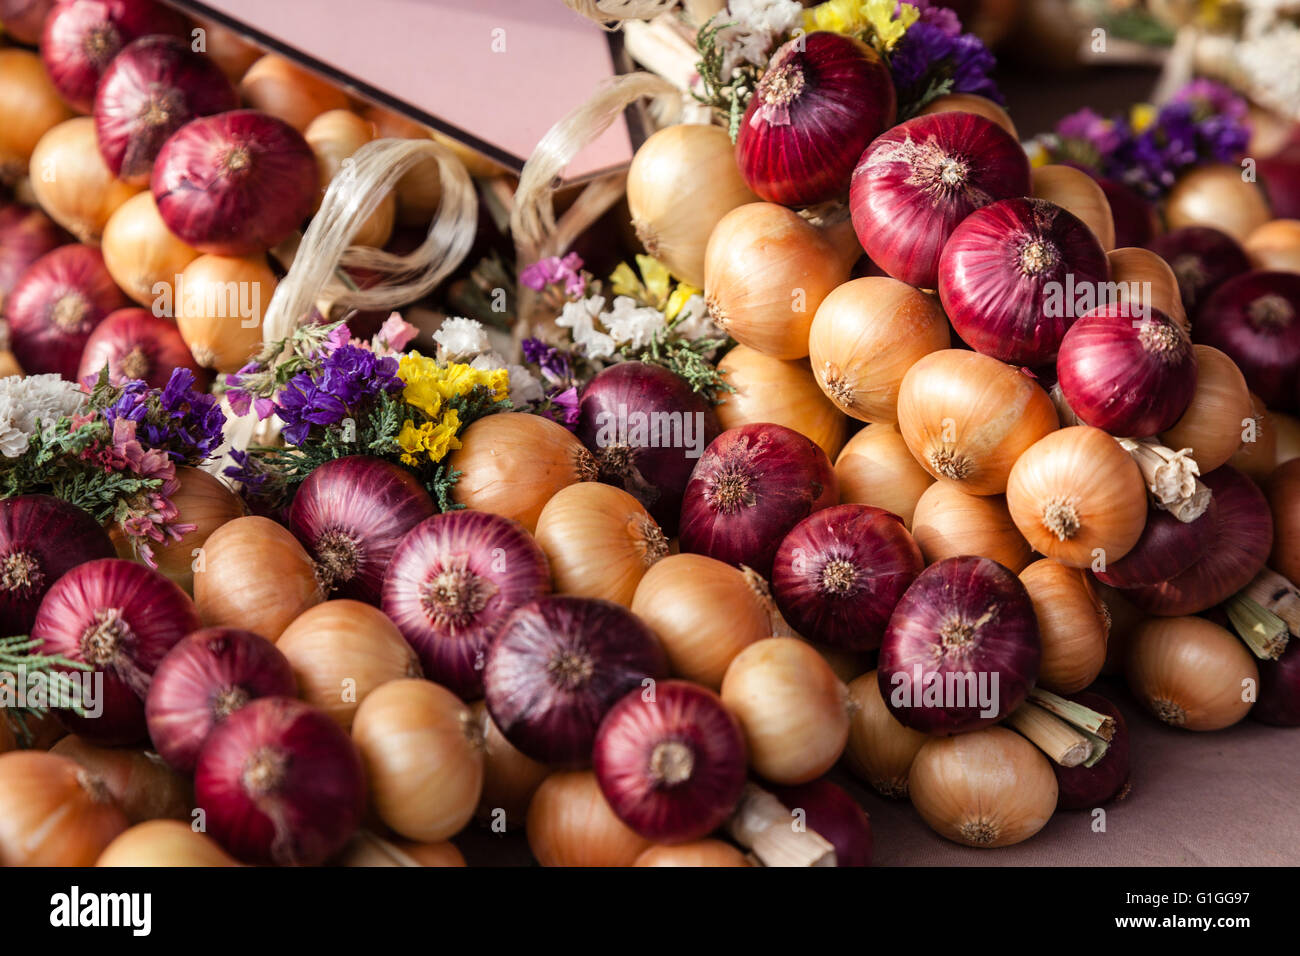 Red and White onions at a farmers market. Stock Photo